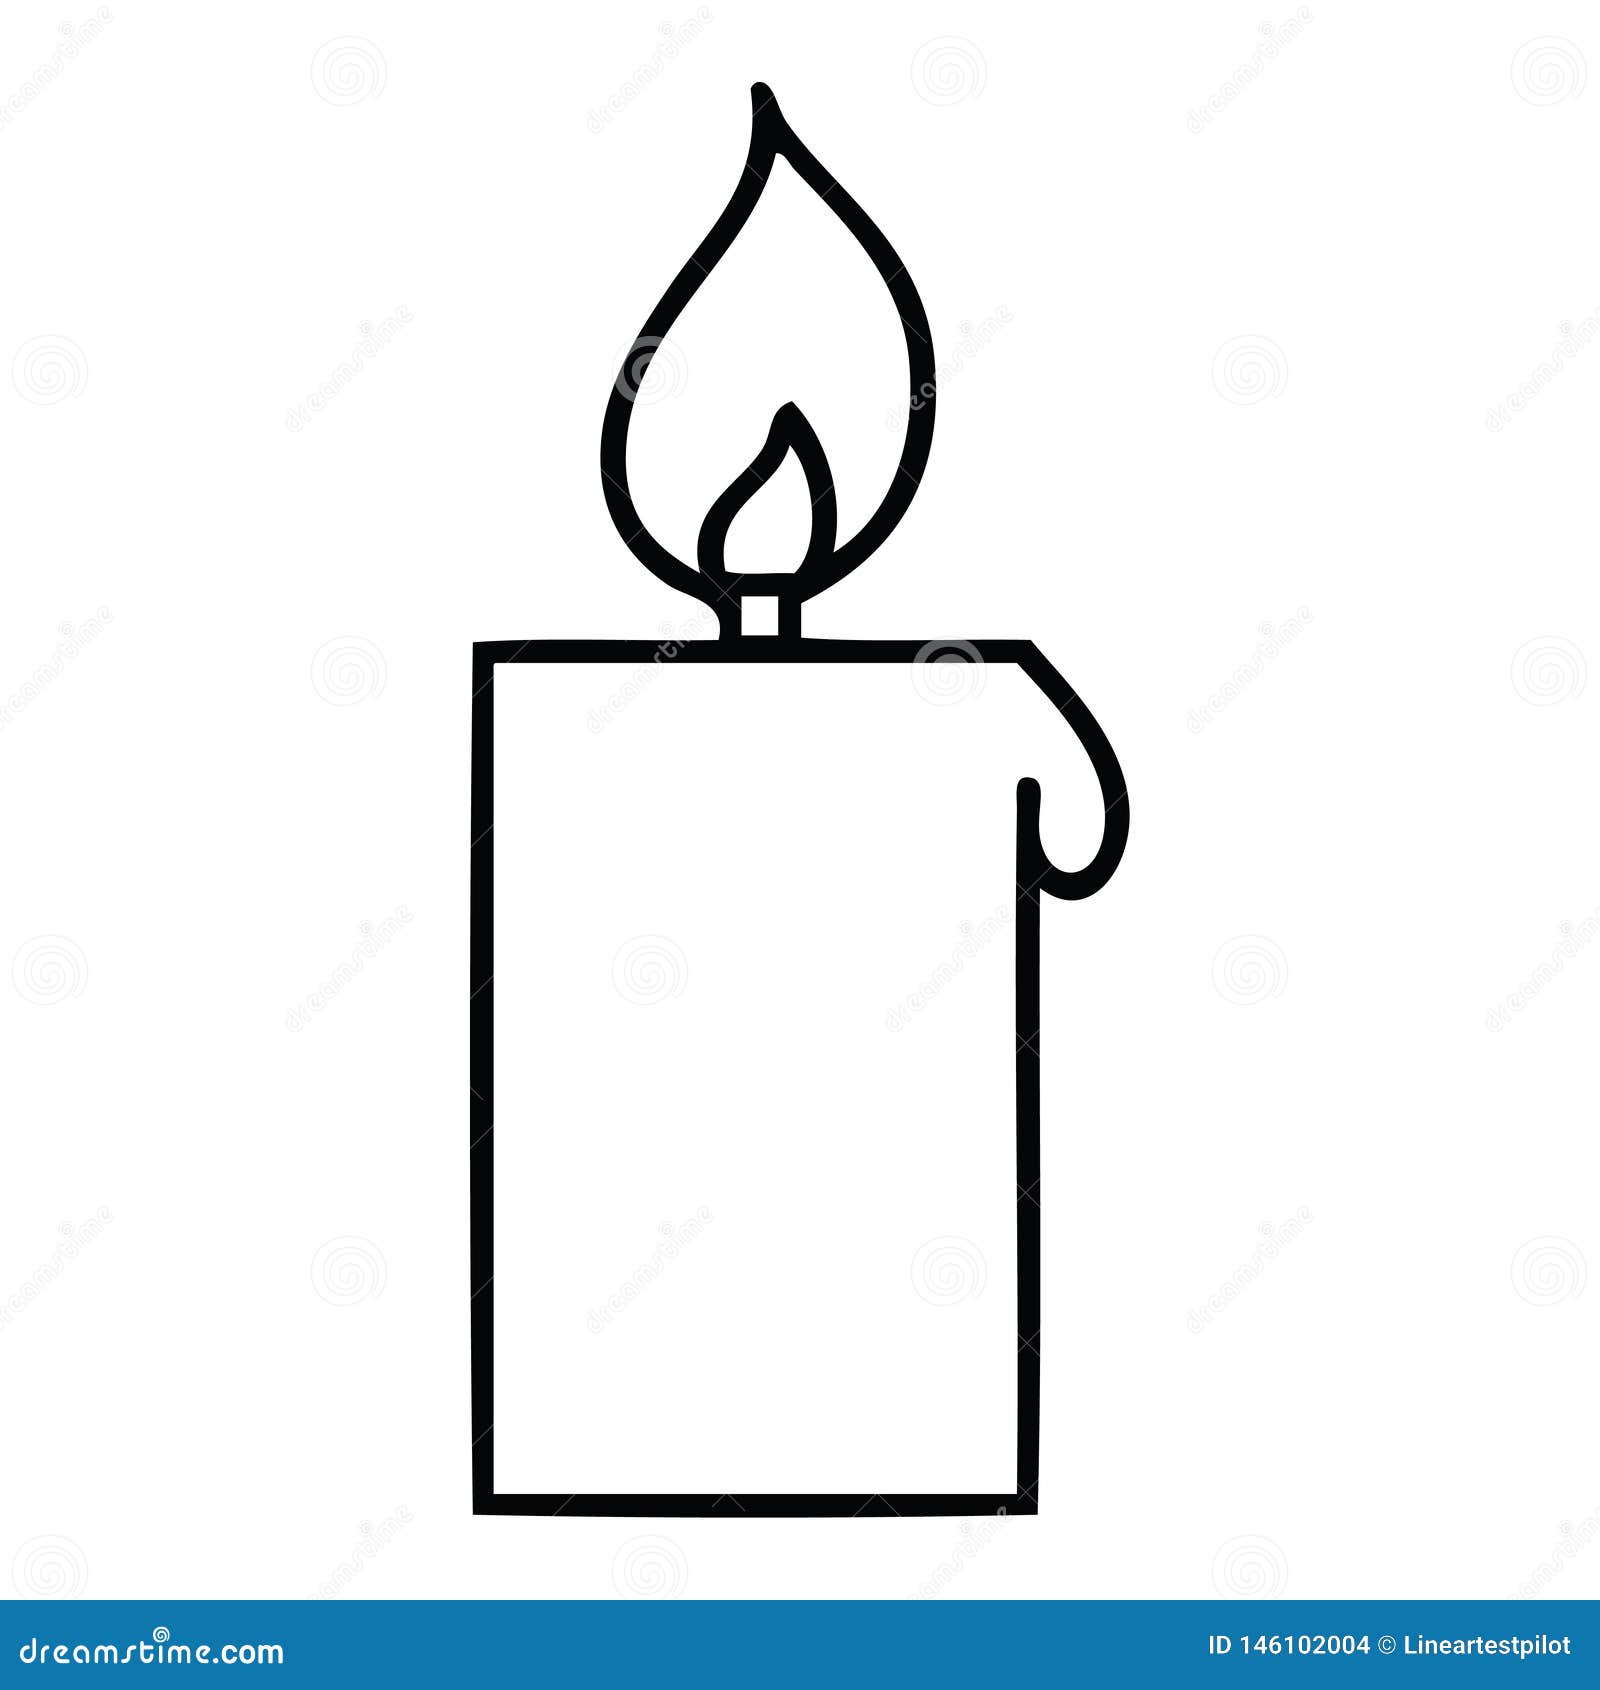 Line Drawing Cartoon of a Lit Candle Stock Vector - Illustration of quirky,  cartoon: 146102004